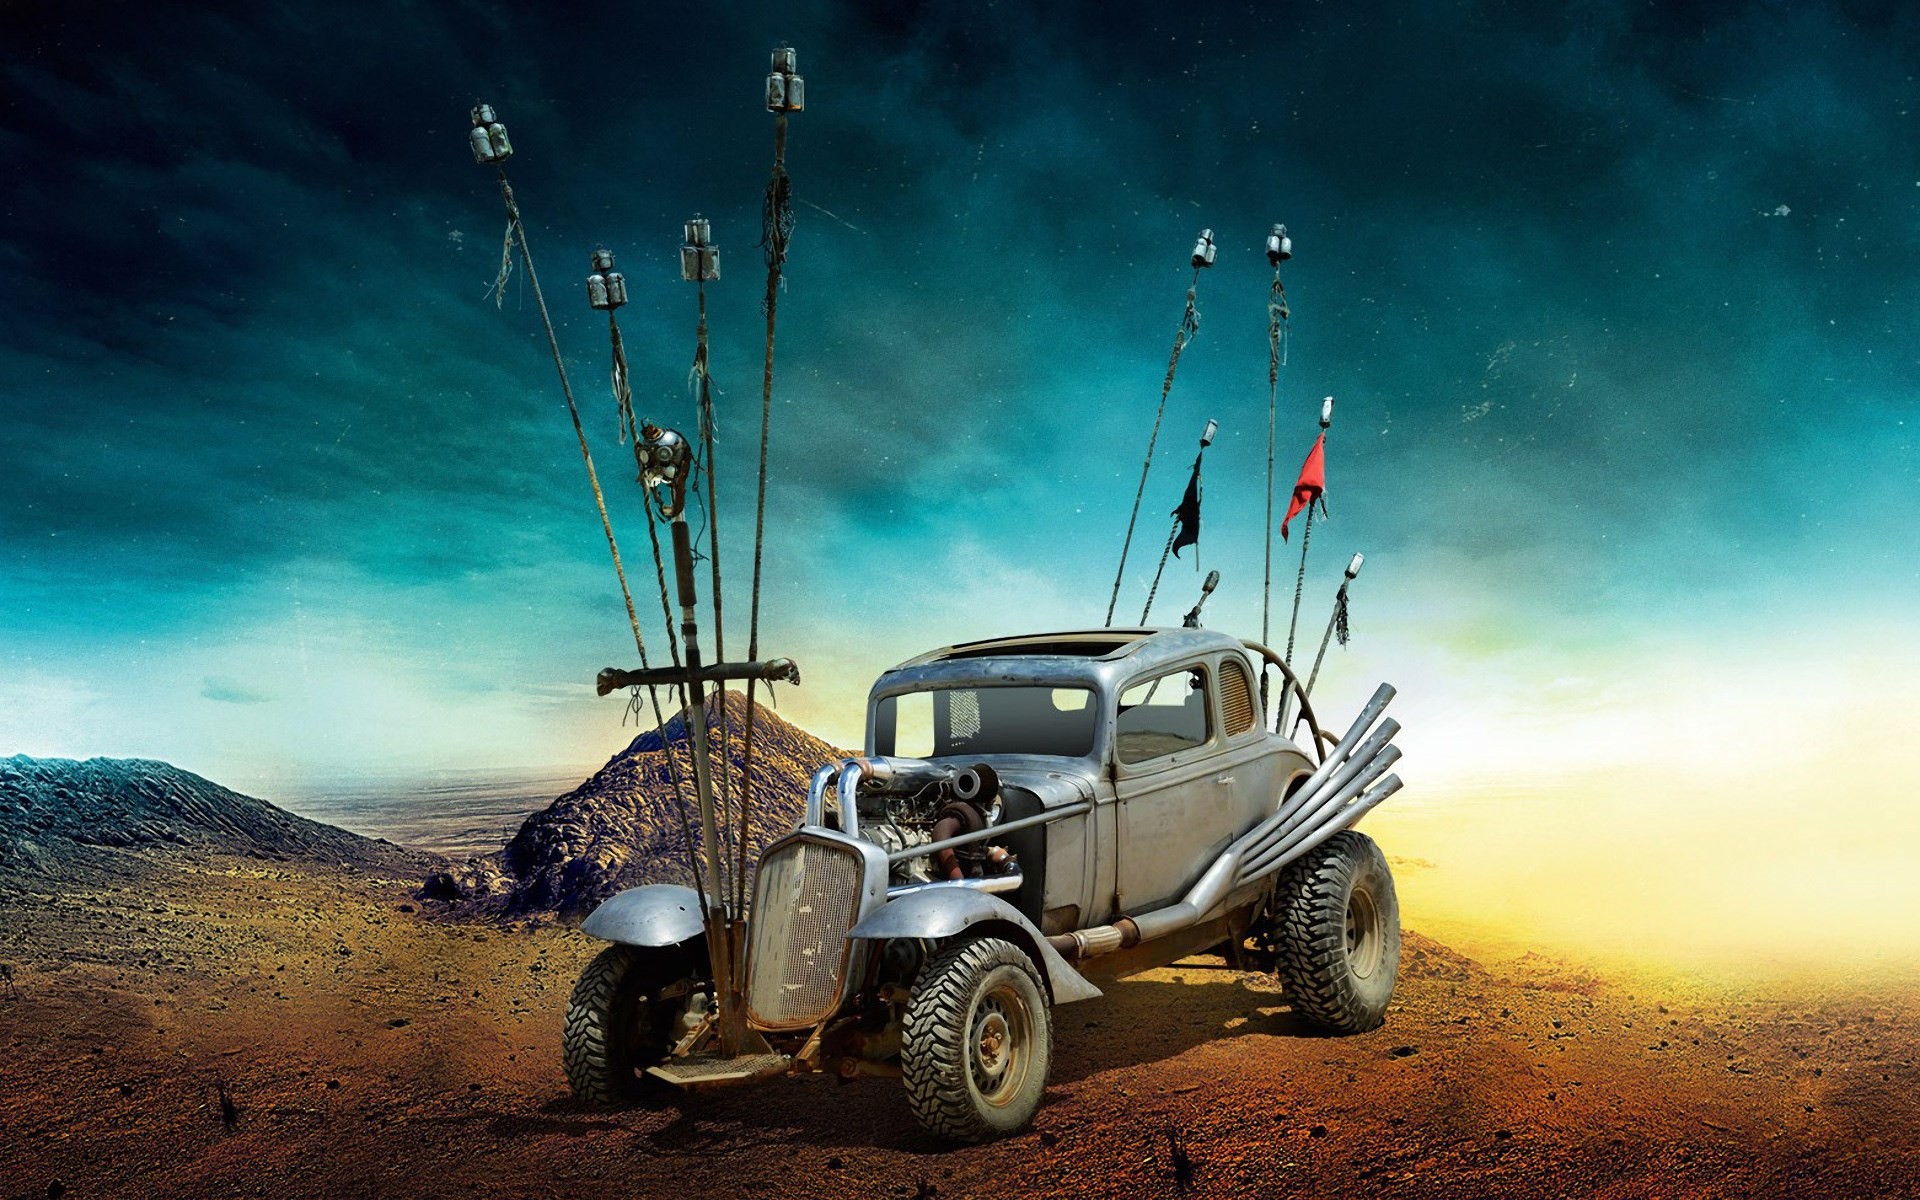 1920x1200 High Resolution Wallpapers = mad max fury road image (Dudley Thomas  )